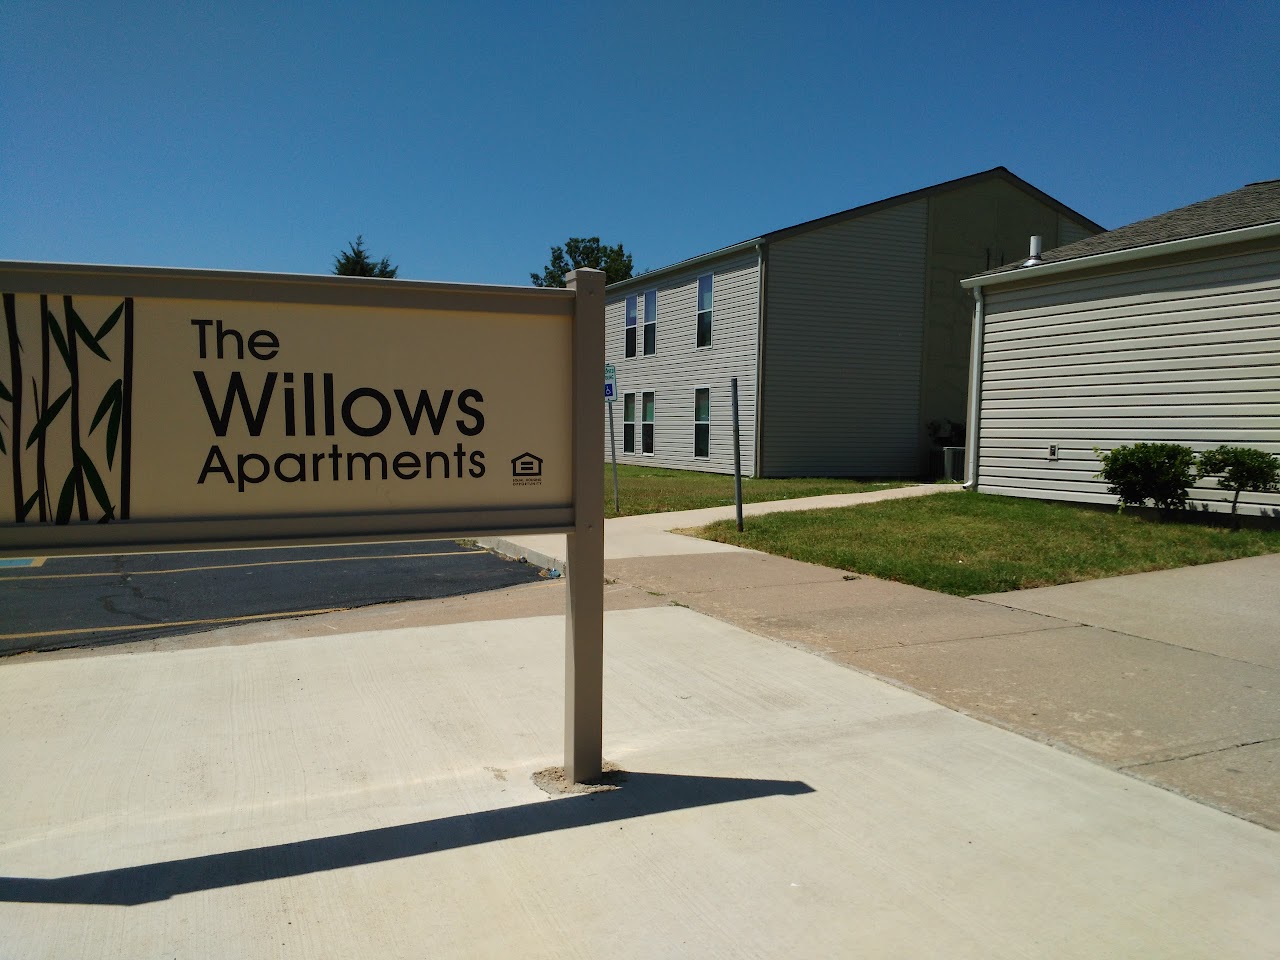 Photo of WILLOW GARDENS. Affordable housing located at 606 HIGHLAND DRIVE BARTLESVILLE, OK 74003